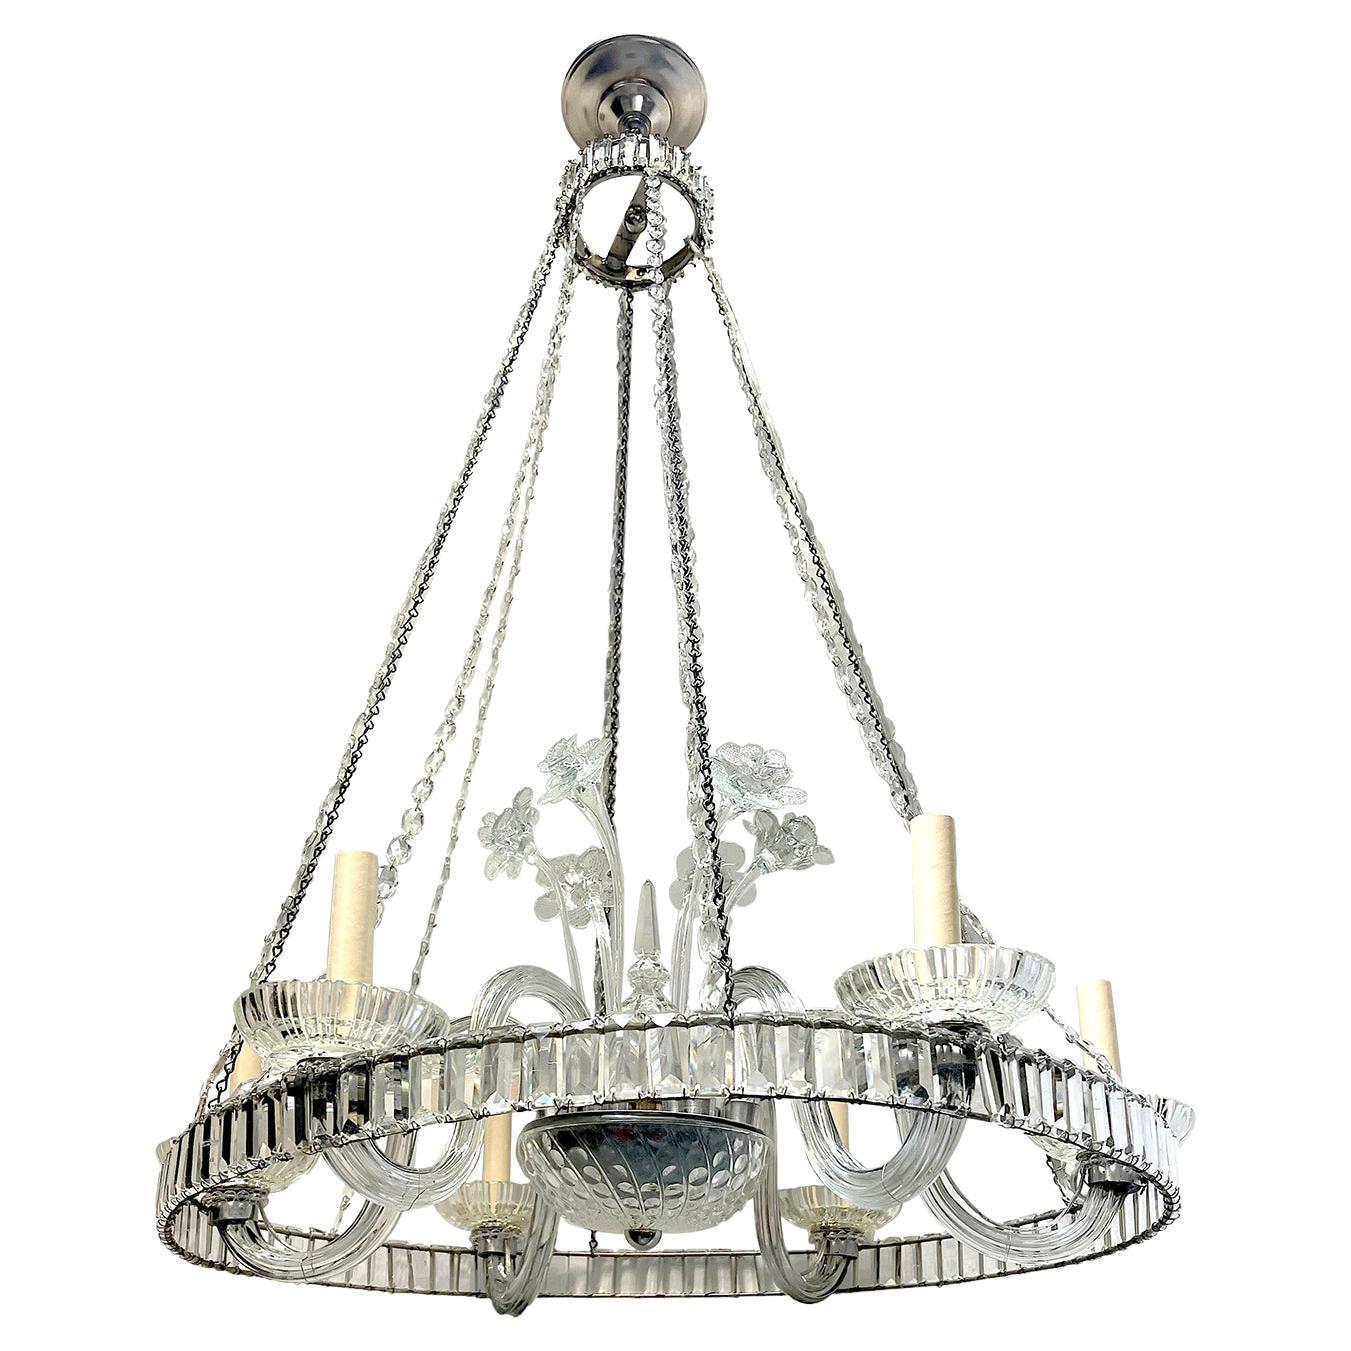 Antique Crystal Chandelier with Glass Flowers